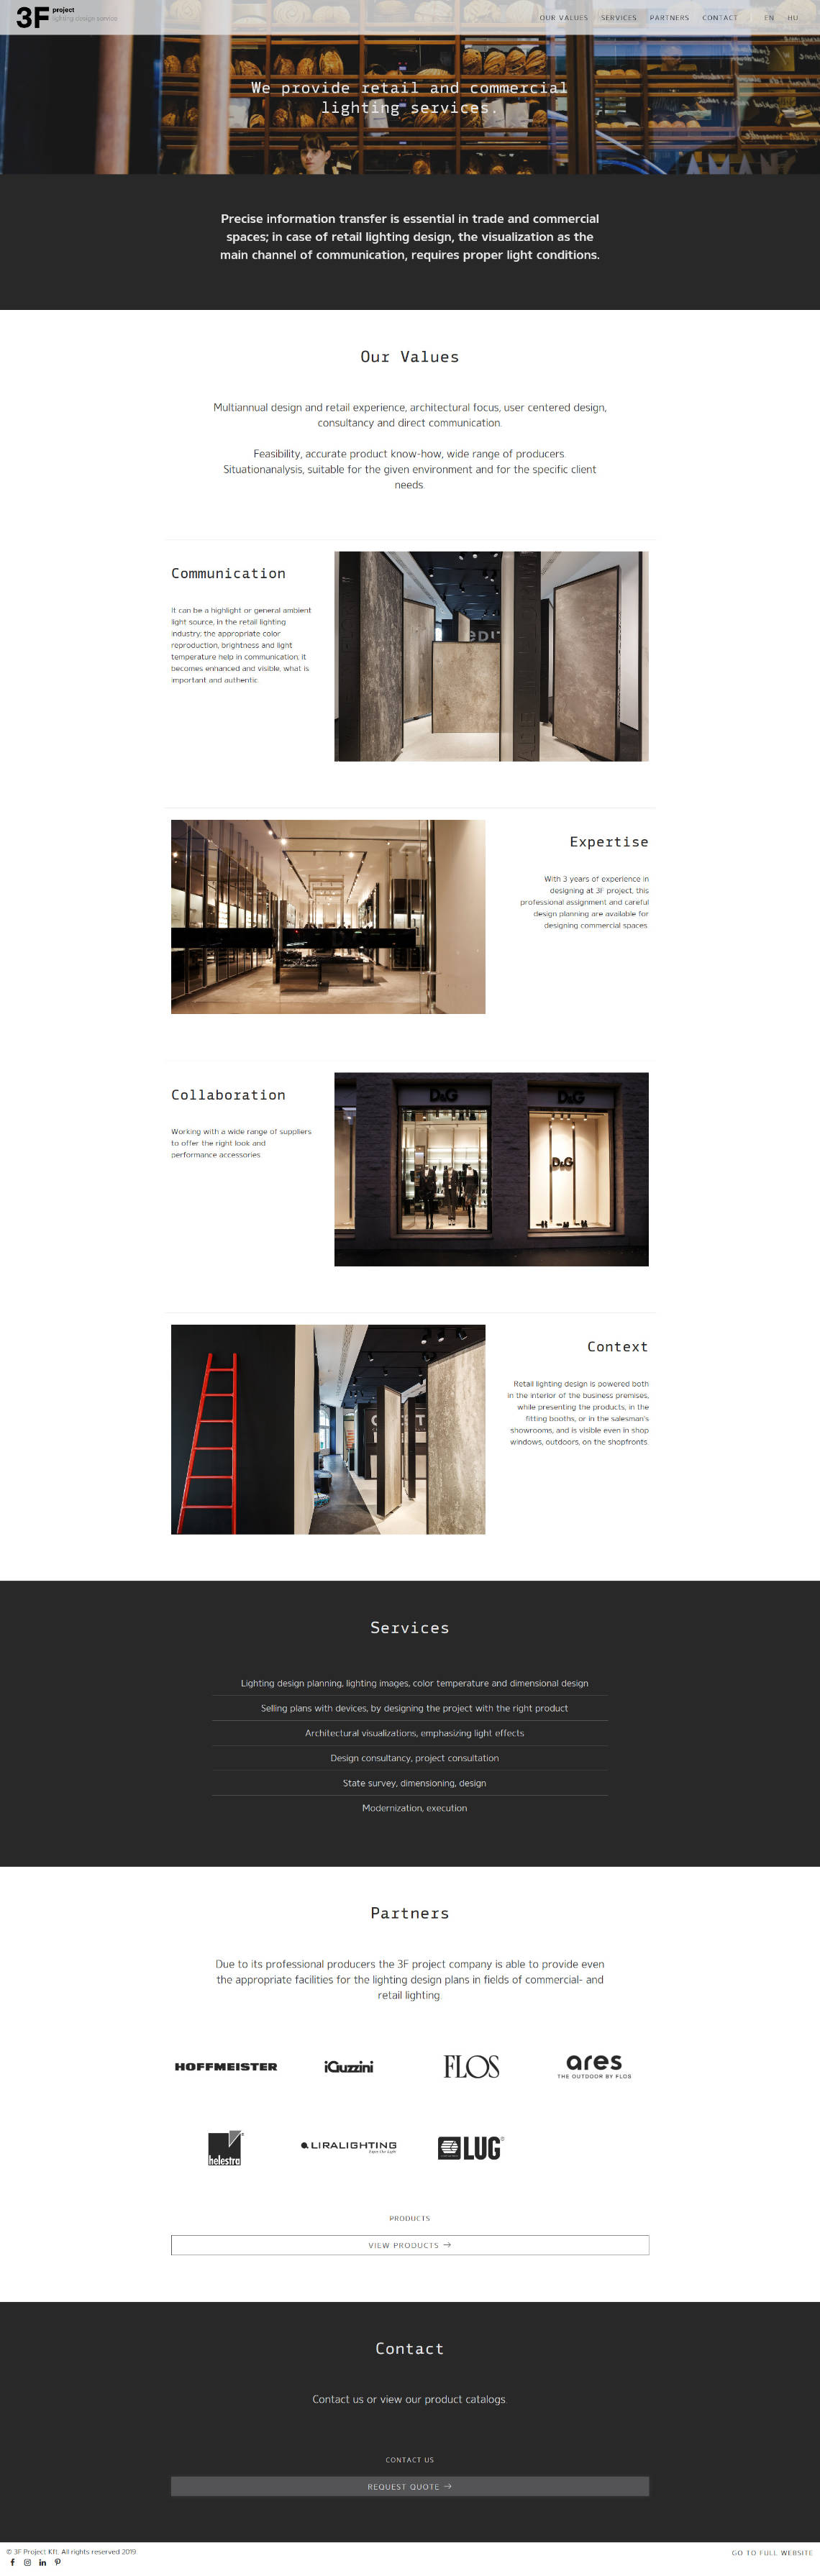 Landing page design, and bespoke WordPress website building for 3F Project's retail lighting service home page screen